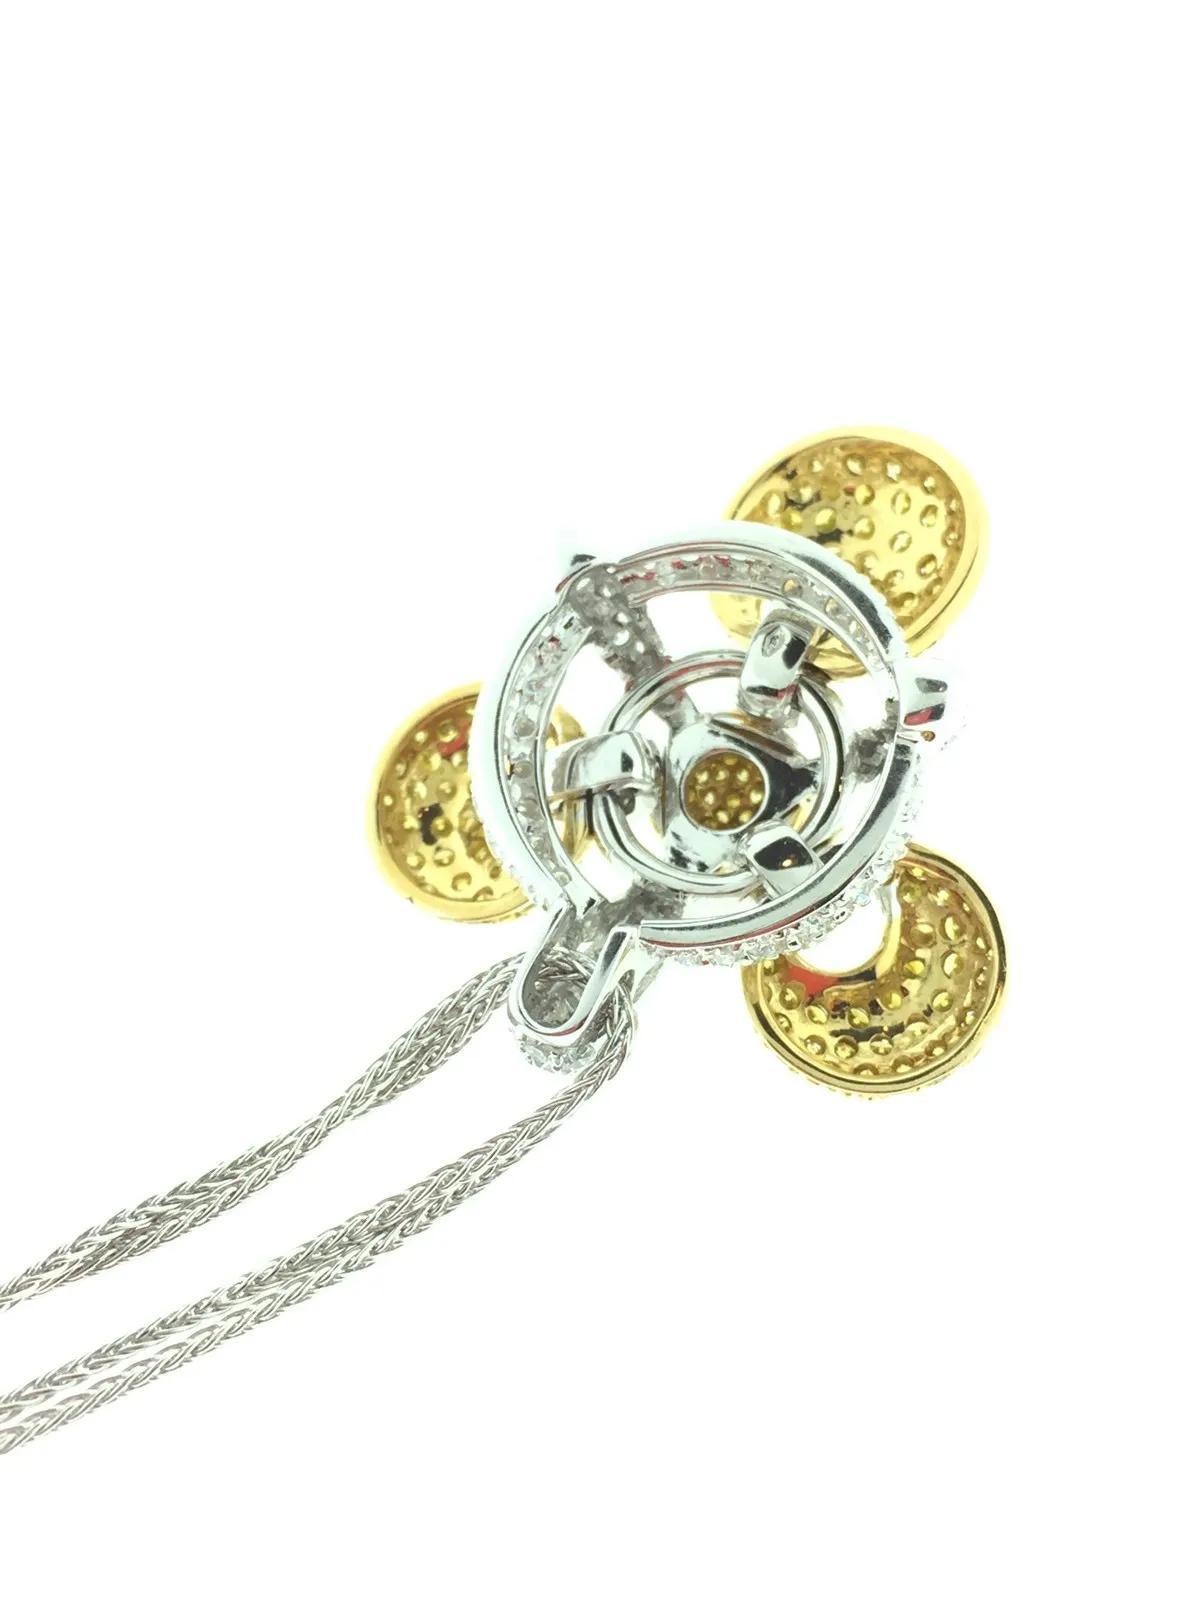 Women's Yellow and White Diamond Pave Pendant Necklace in 18k Gold For Sale